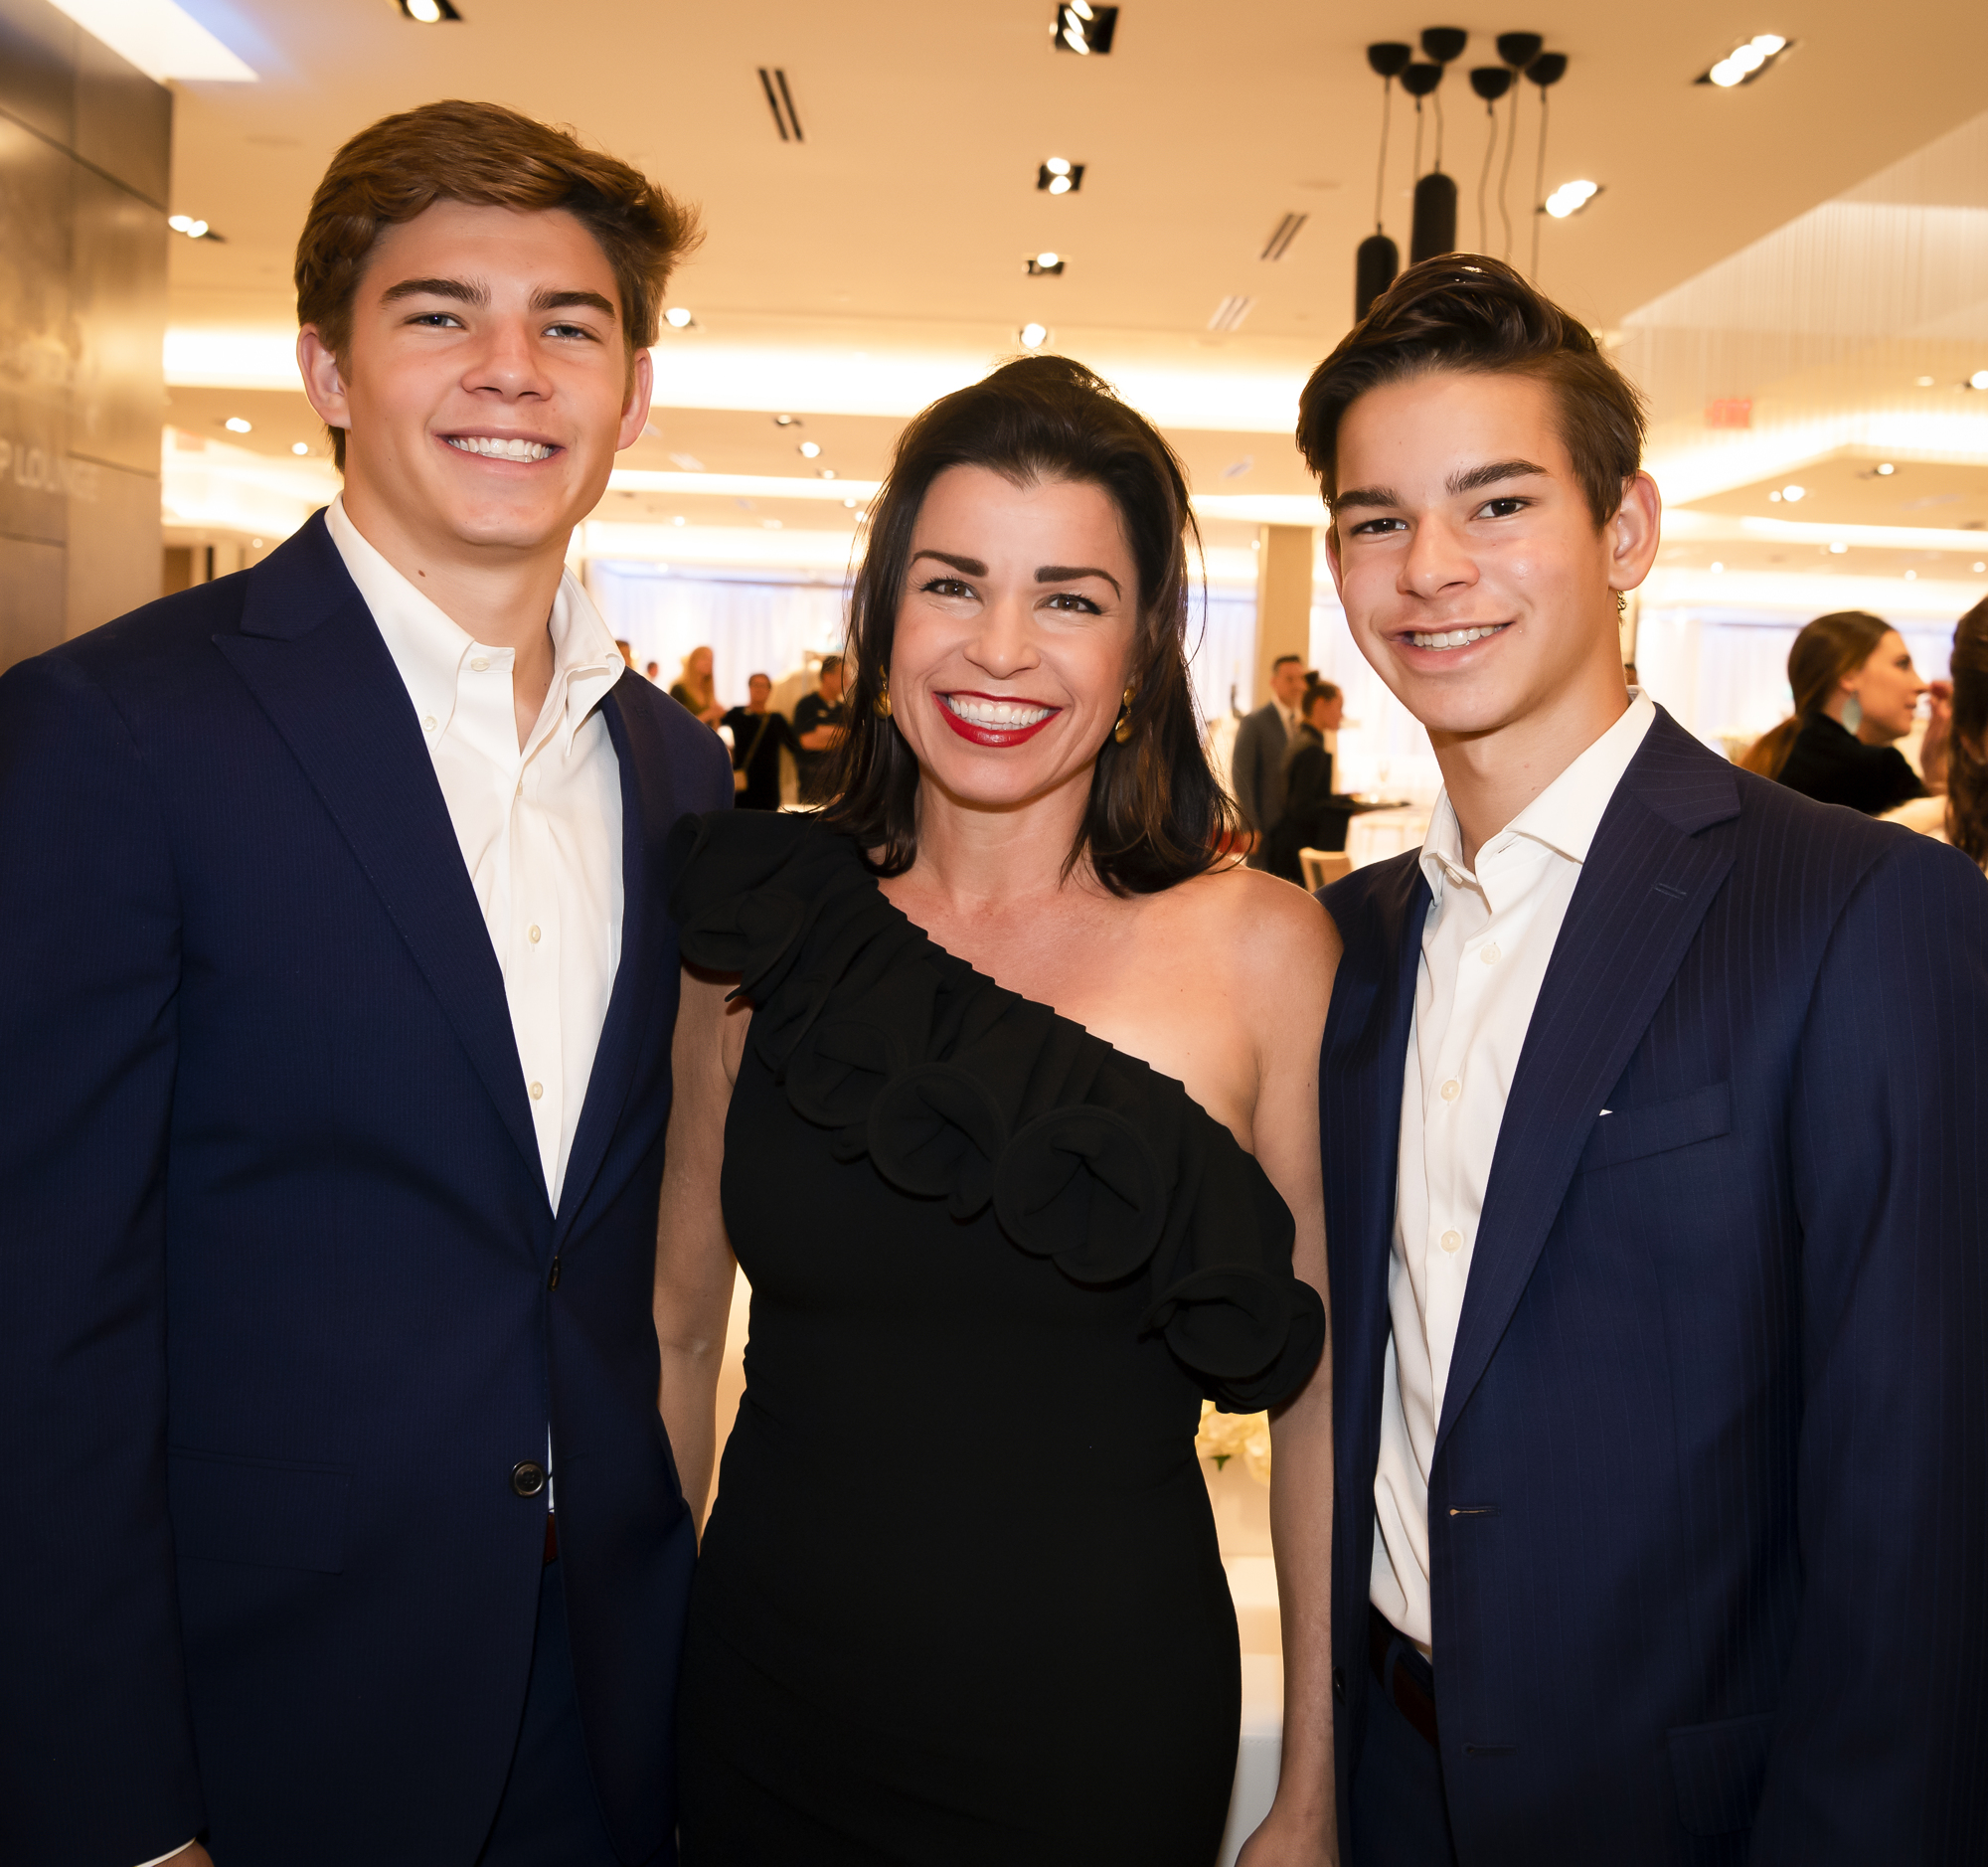 Maximilian Fisher, CEO and President Elizabeth Melendez Fisher and Leopold Fisher. Photo by Cliff Roles.